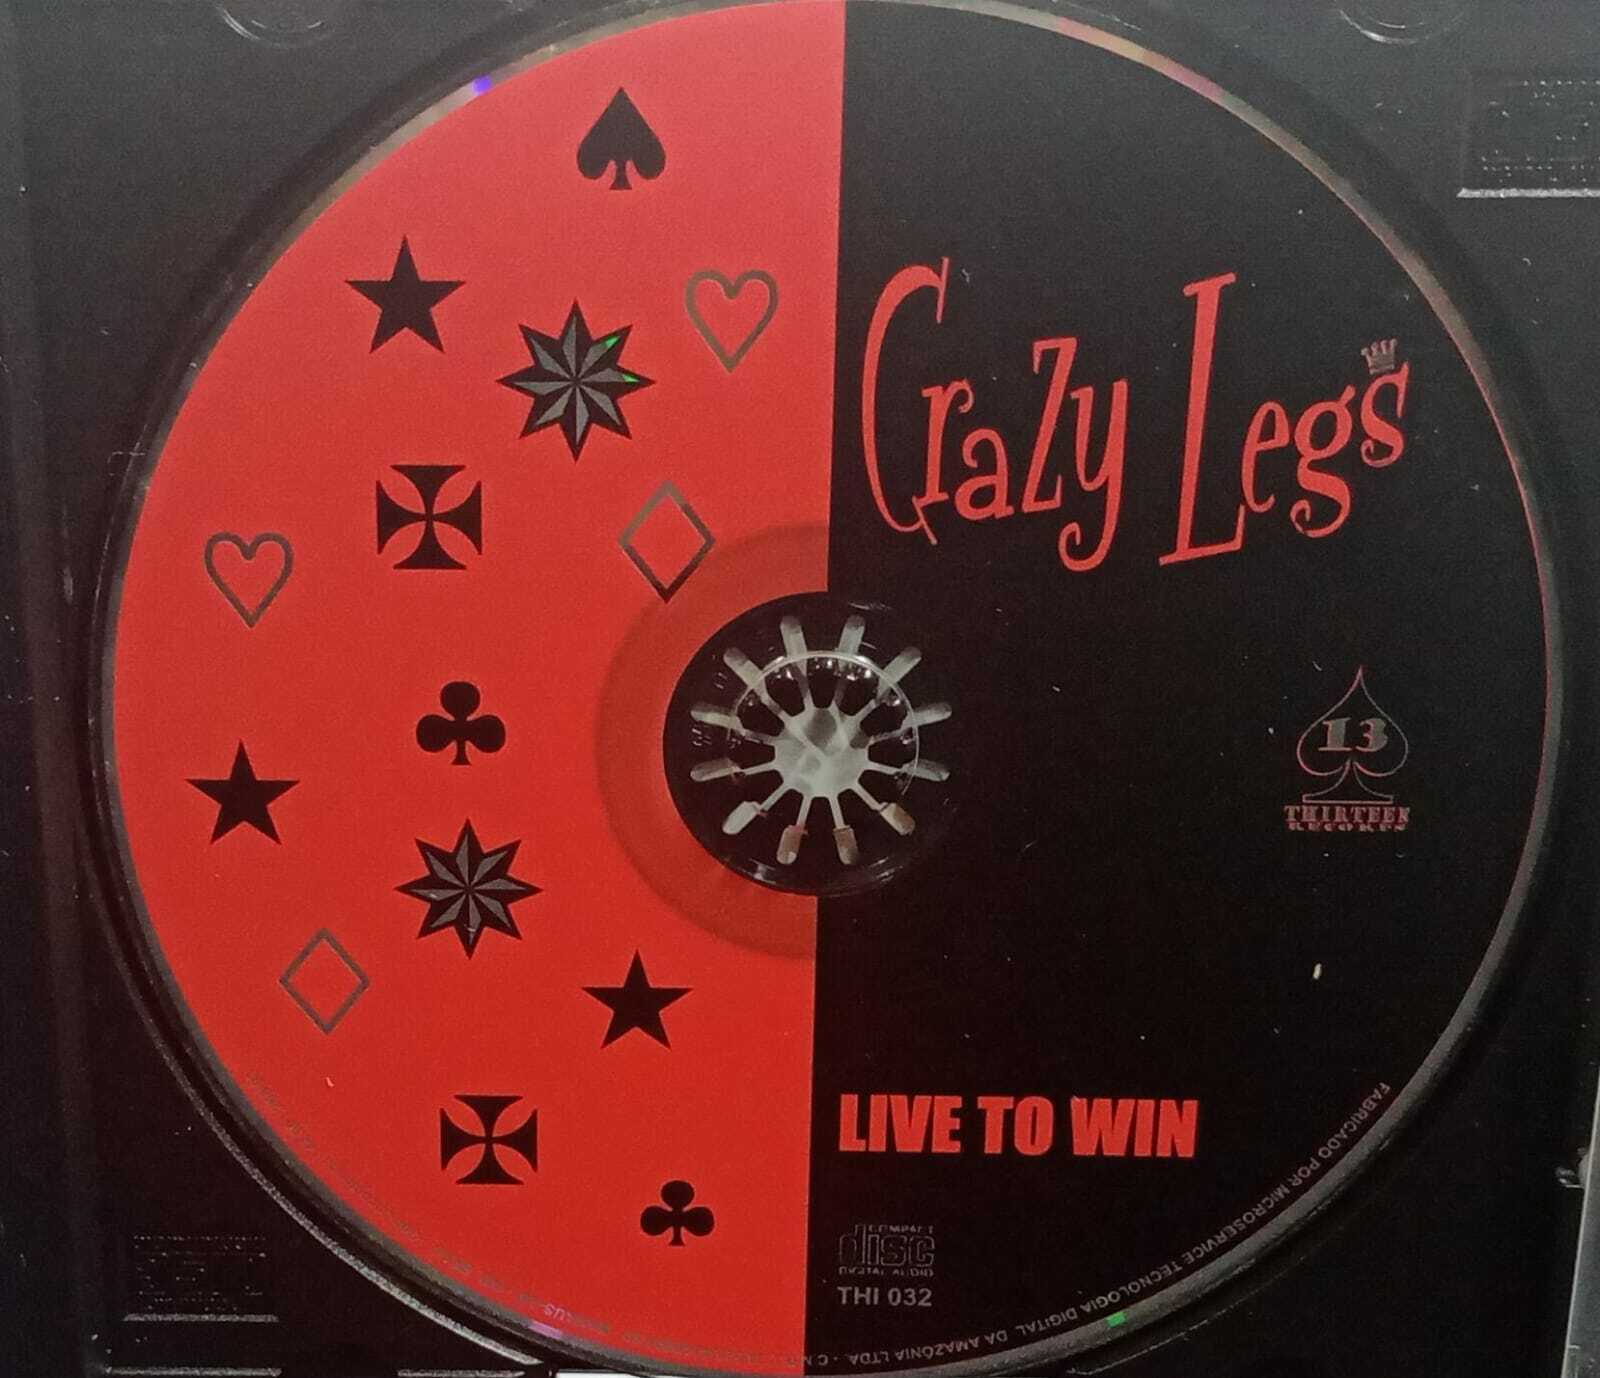 CD - Crazy Legs - Live To Win